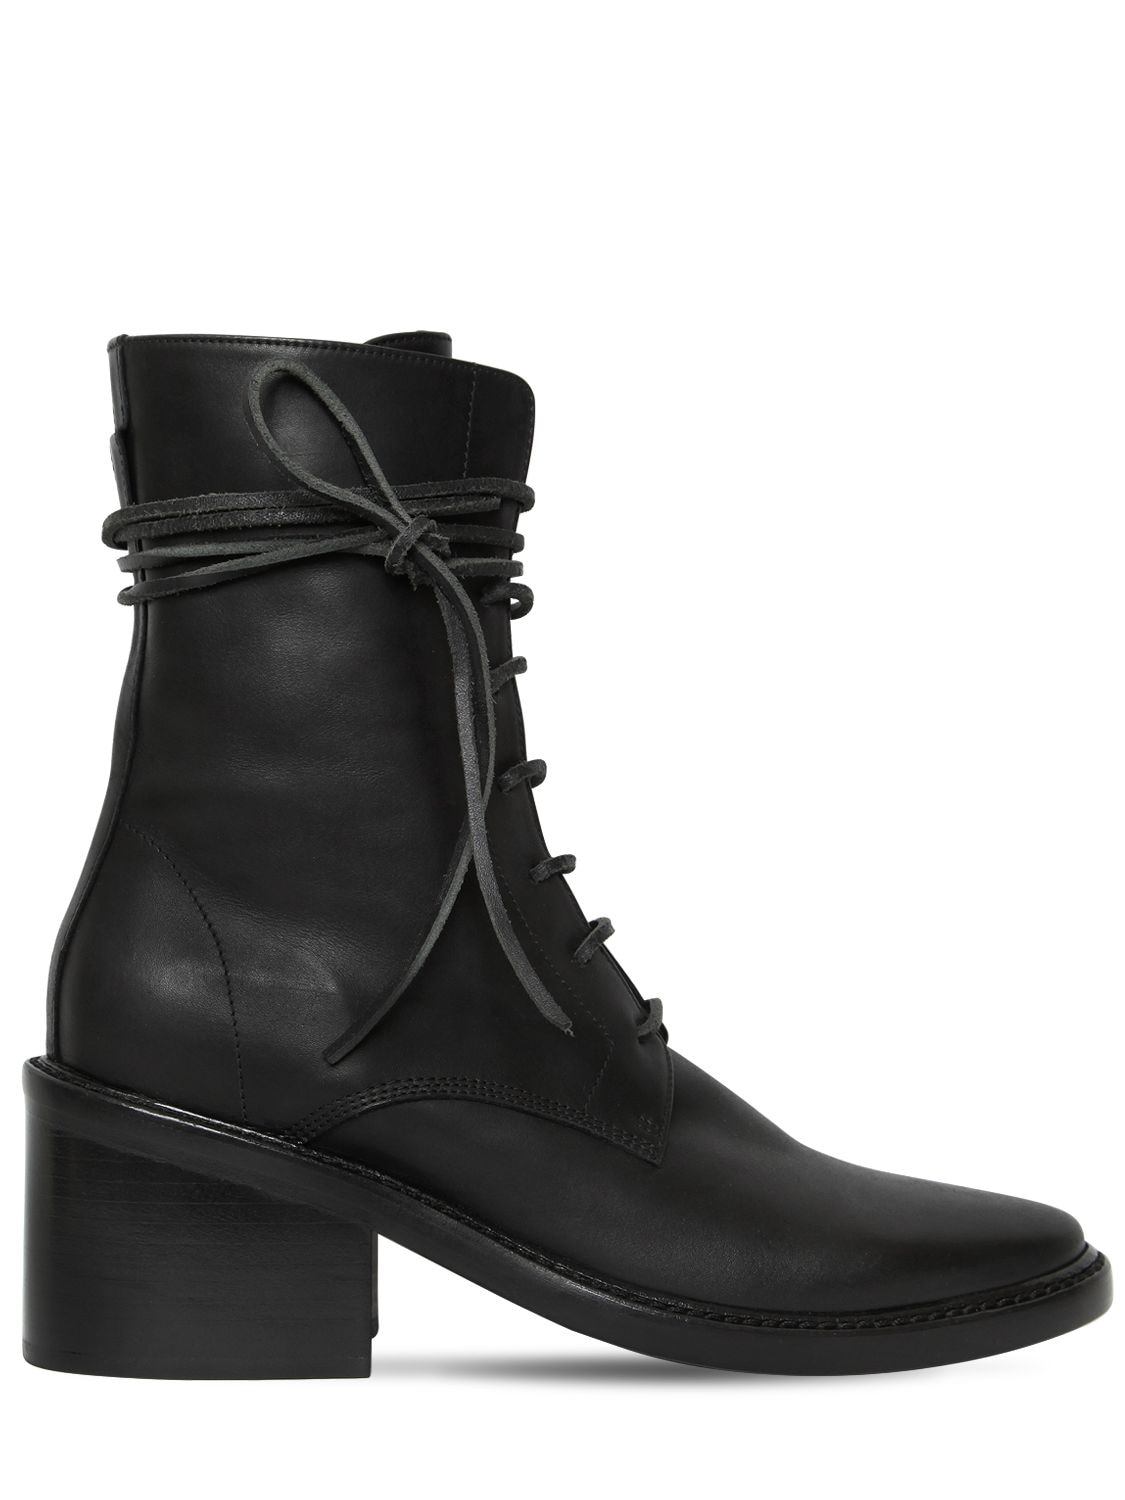 ANN DEMEULEMEESTER 60MM LACE-UP LEATHER BOOTS,70I51K009-MDK50